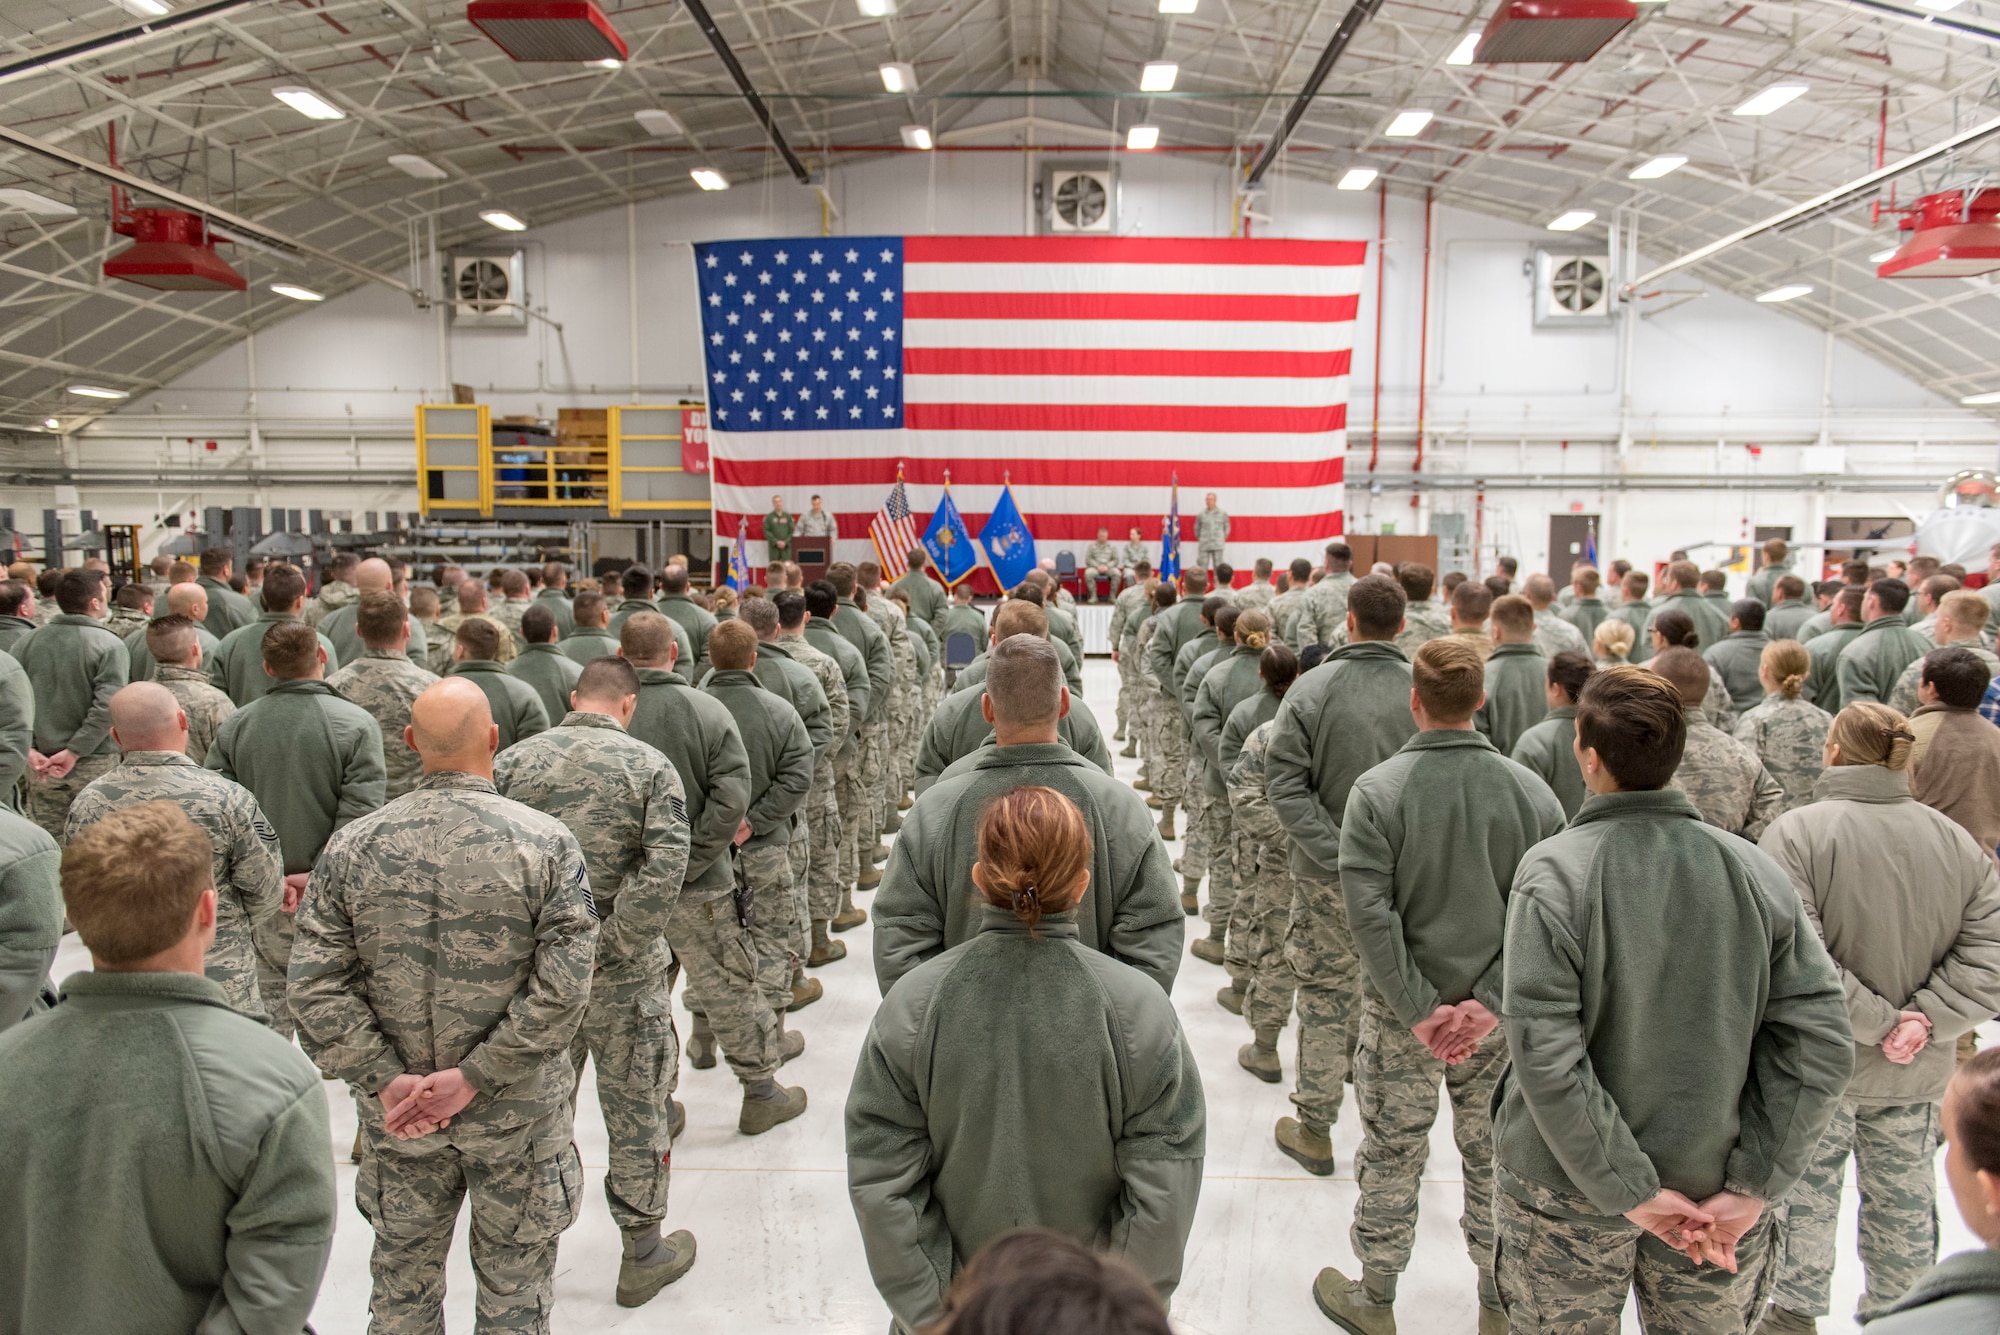 Airmen from the 115th Maintenance Group, Truax Field, Wisconsin, stand in formation during the 115th MXG change of command ceremony December 2, 2018, at the 115th Fighter Wing on Truax. Col. Christopher Green is reliquishing command of the 115th MXG to Lt. Col. Wilhelmina Panzer. (U.S. Air National Guard photo by Airman 1st Class Cameron Lewis)